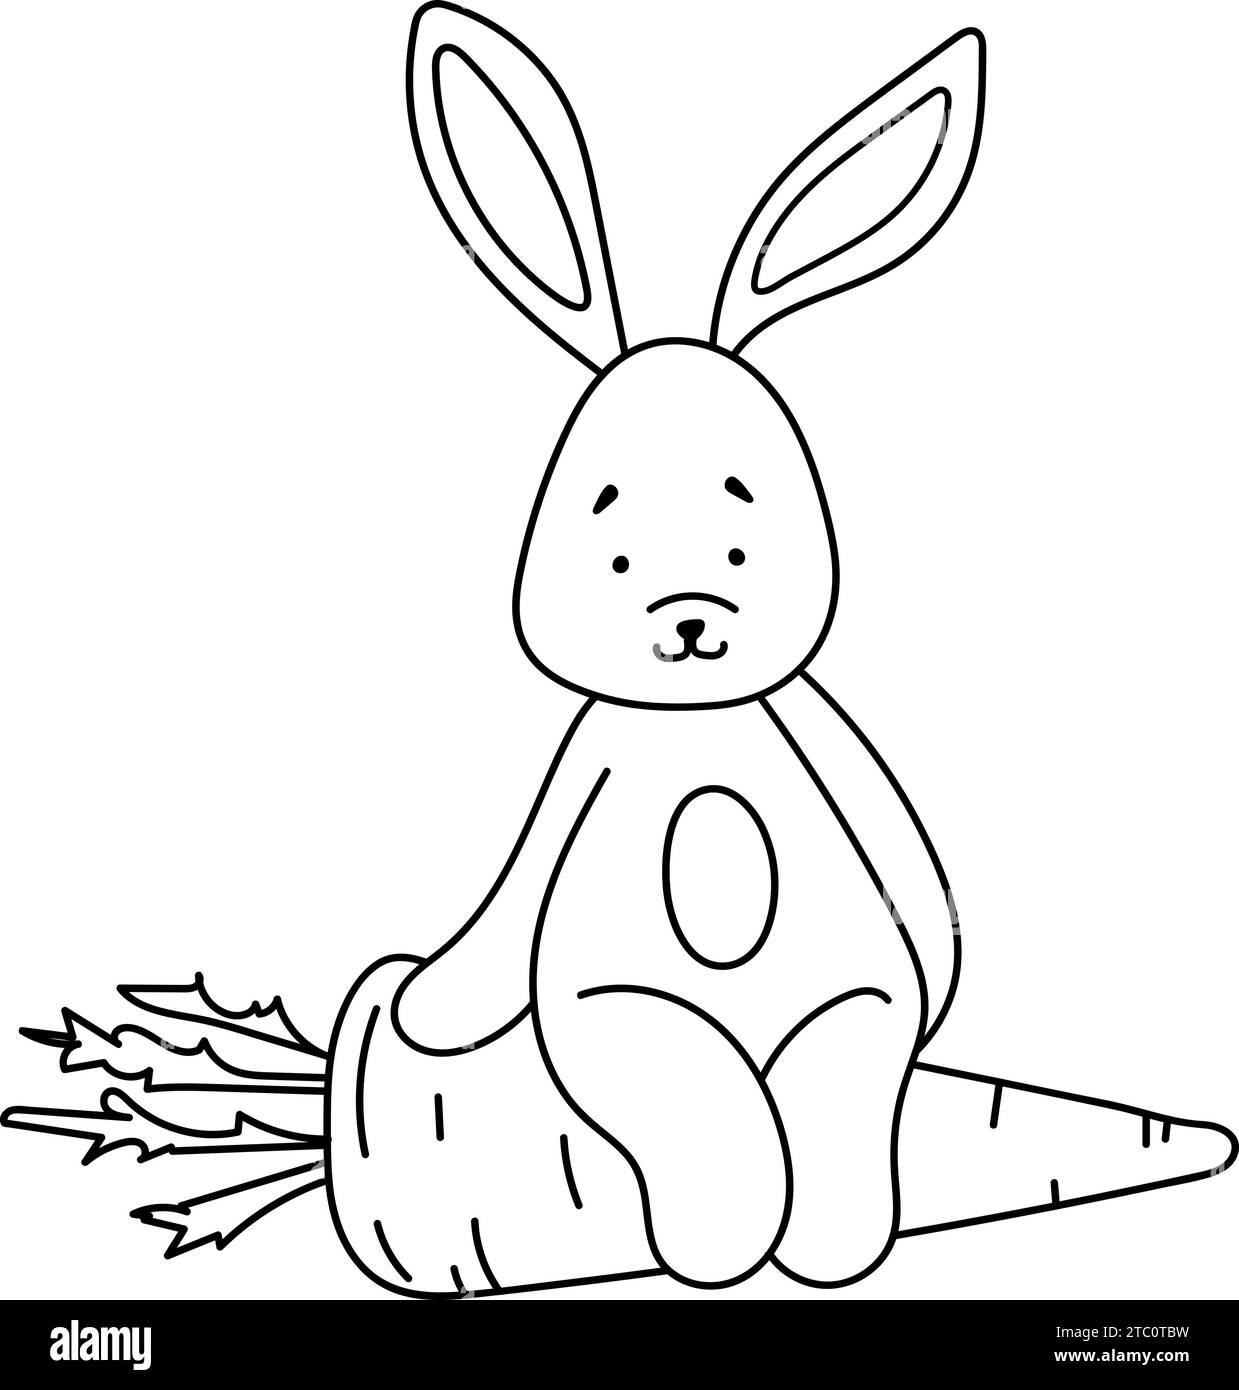 Coloring Page For Kids Featuring A Bunny Sitting On A Large Carrot, Perfect For Children'S Creativity Is A Fun, Creative Coloring Book For Children, Featuring Vector Illustrations Stock Vector